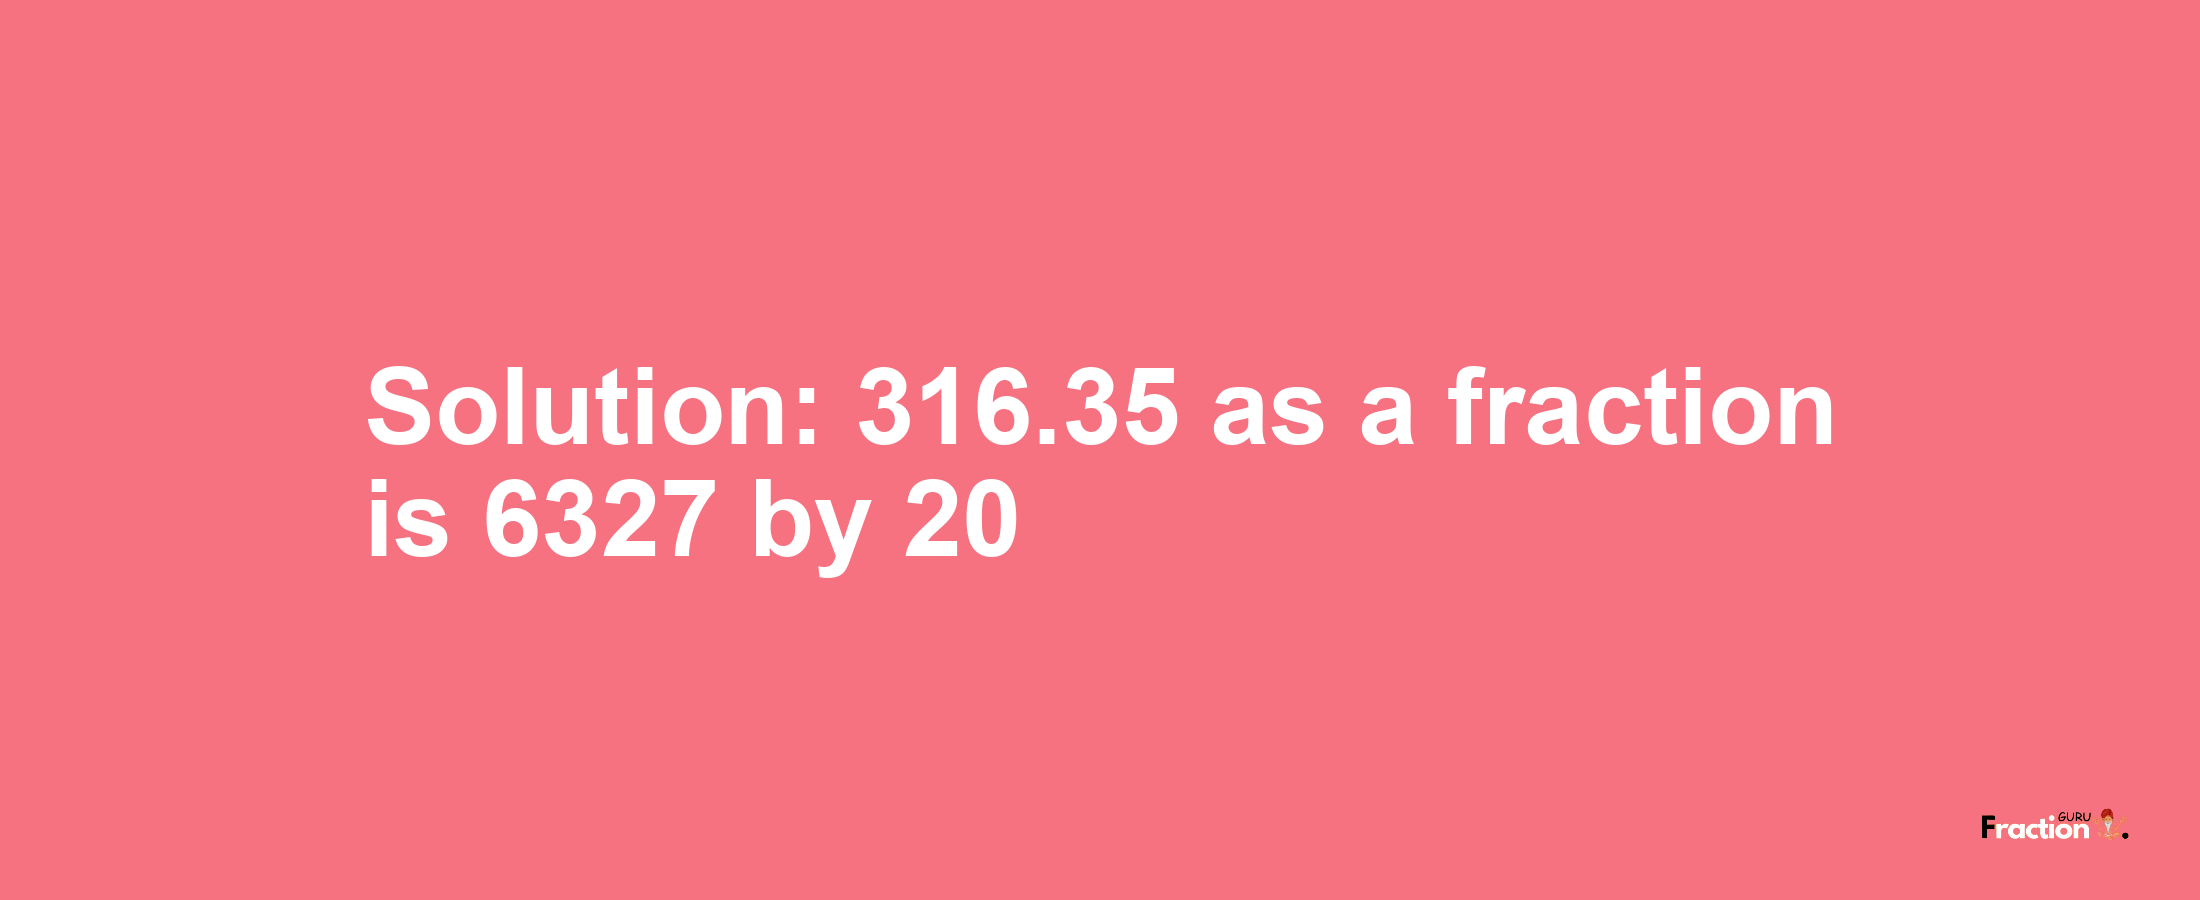 Solution:316.35 as a fraction is 6327/20